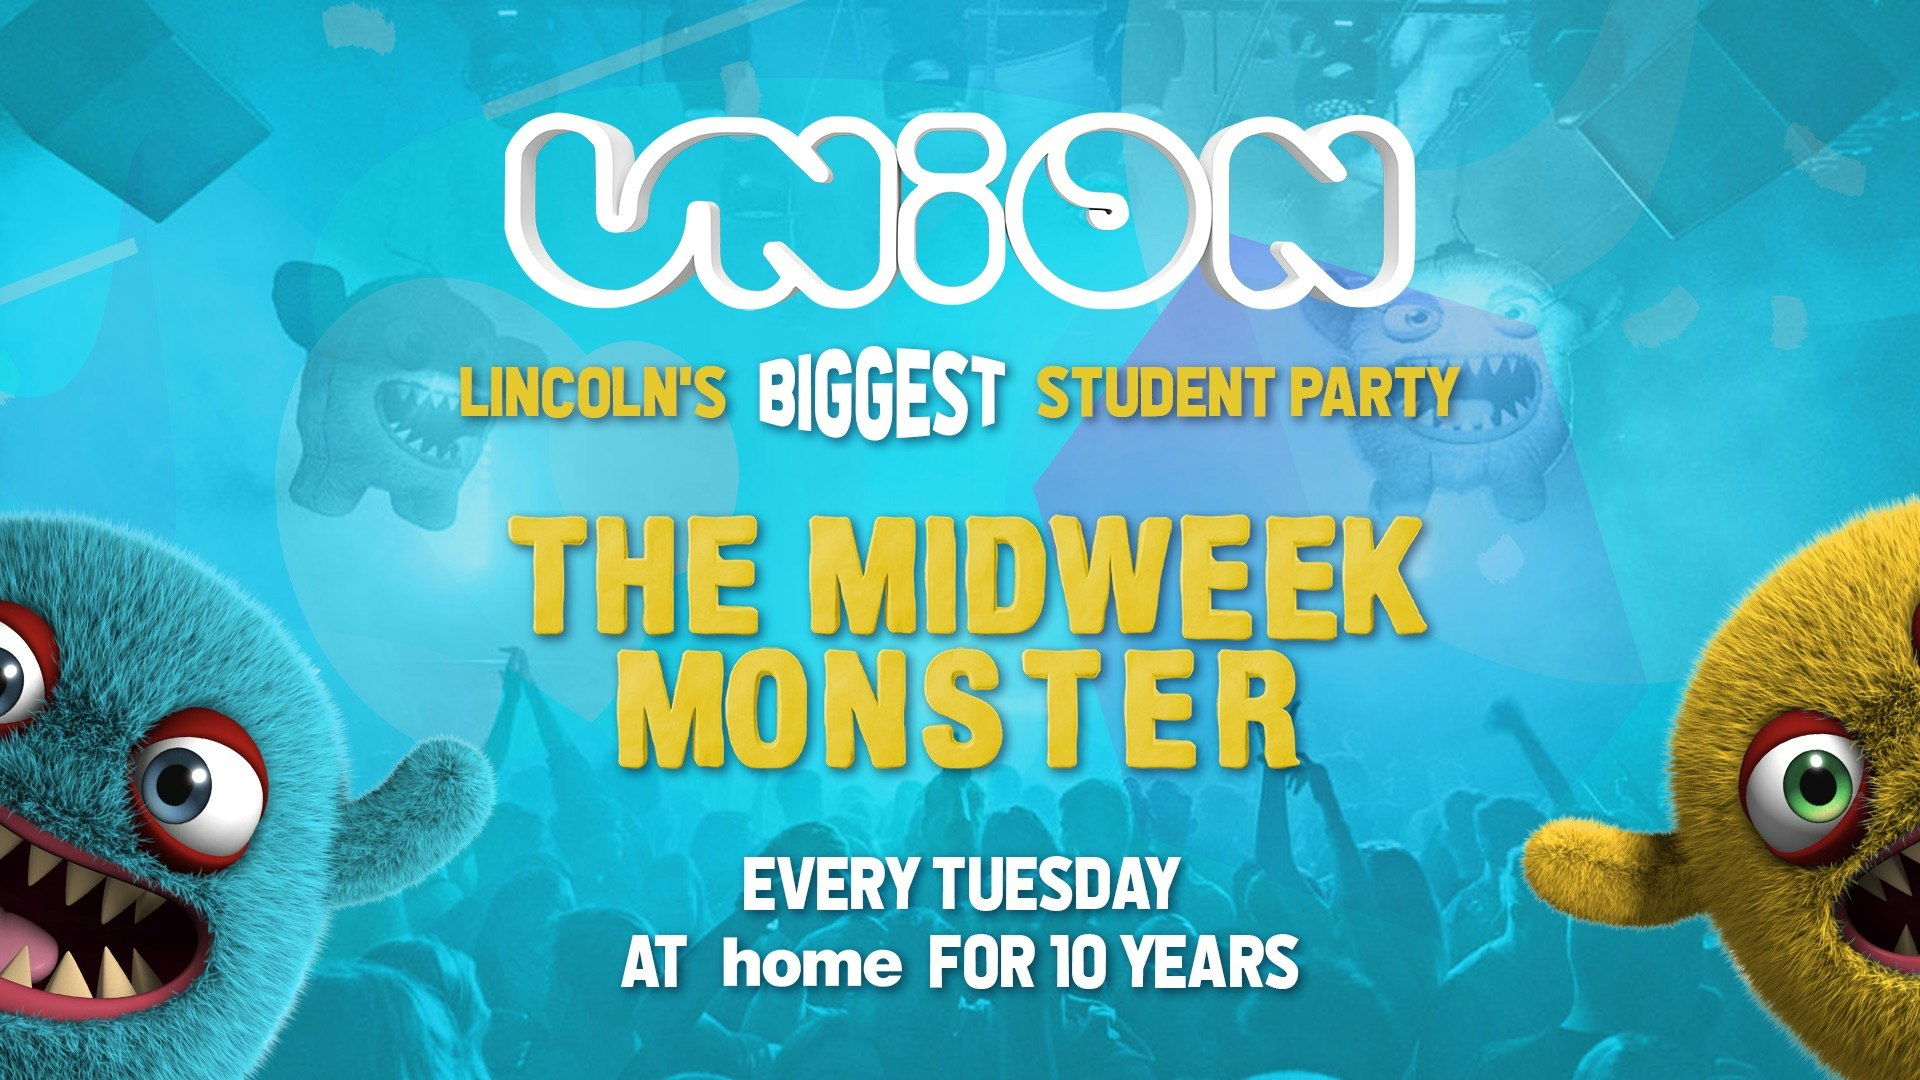 UNION TUESDAY’S // The Midweek Monster!